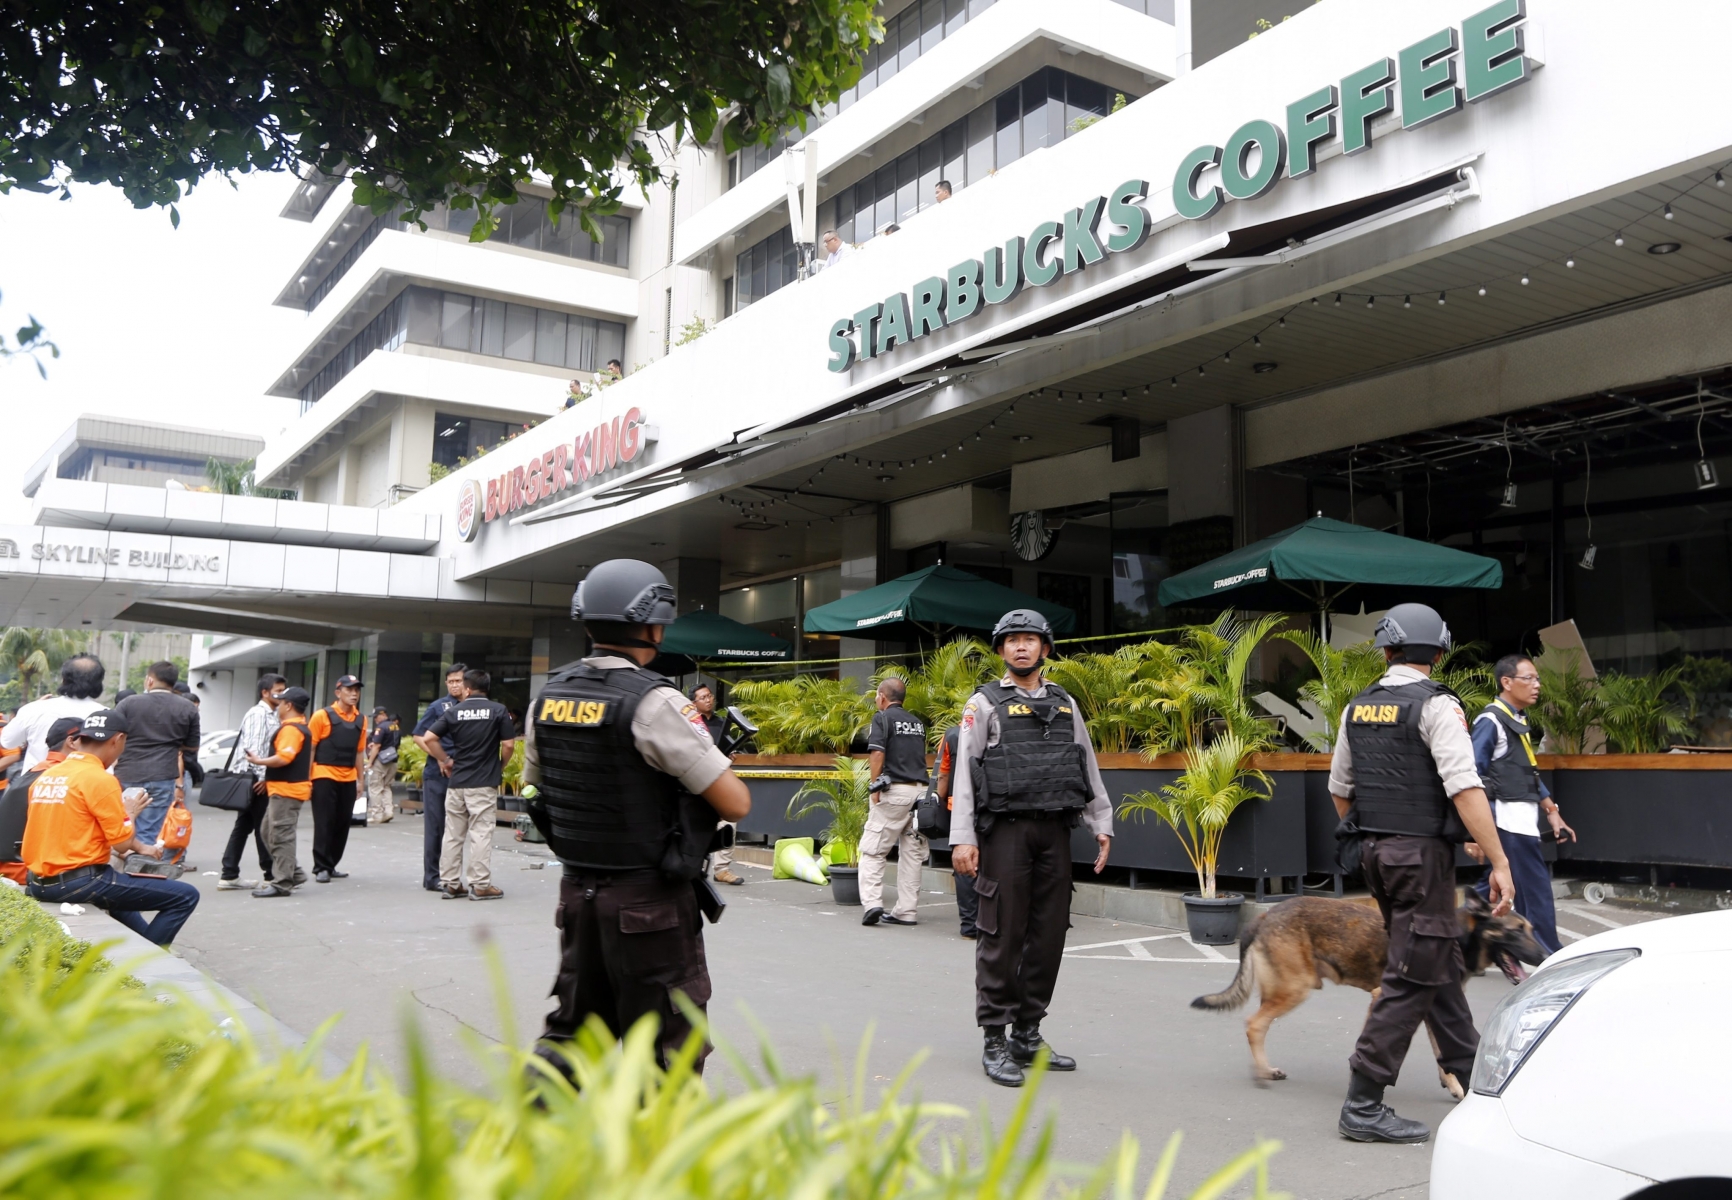 epa05101170 Indonesian police officers stand guard in front of a Starbucks cafe after a bomb blast in front of a shopping mall in Jakarta, Indonesia, 14 January 2016. Seven people, including four suspected attackers, died in bomb blasts and gunfire in the centre of the Indonesian capital Jakarta on 14 January, police said, in what the country's president described as an act of terrorism.  EPA/BAGUS INDAHONO INDONESIA JAKARTA BOMB BLAST